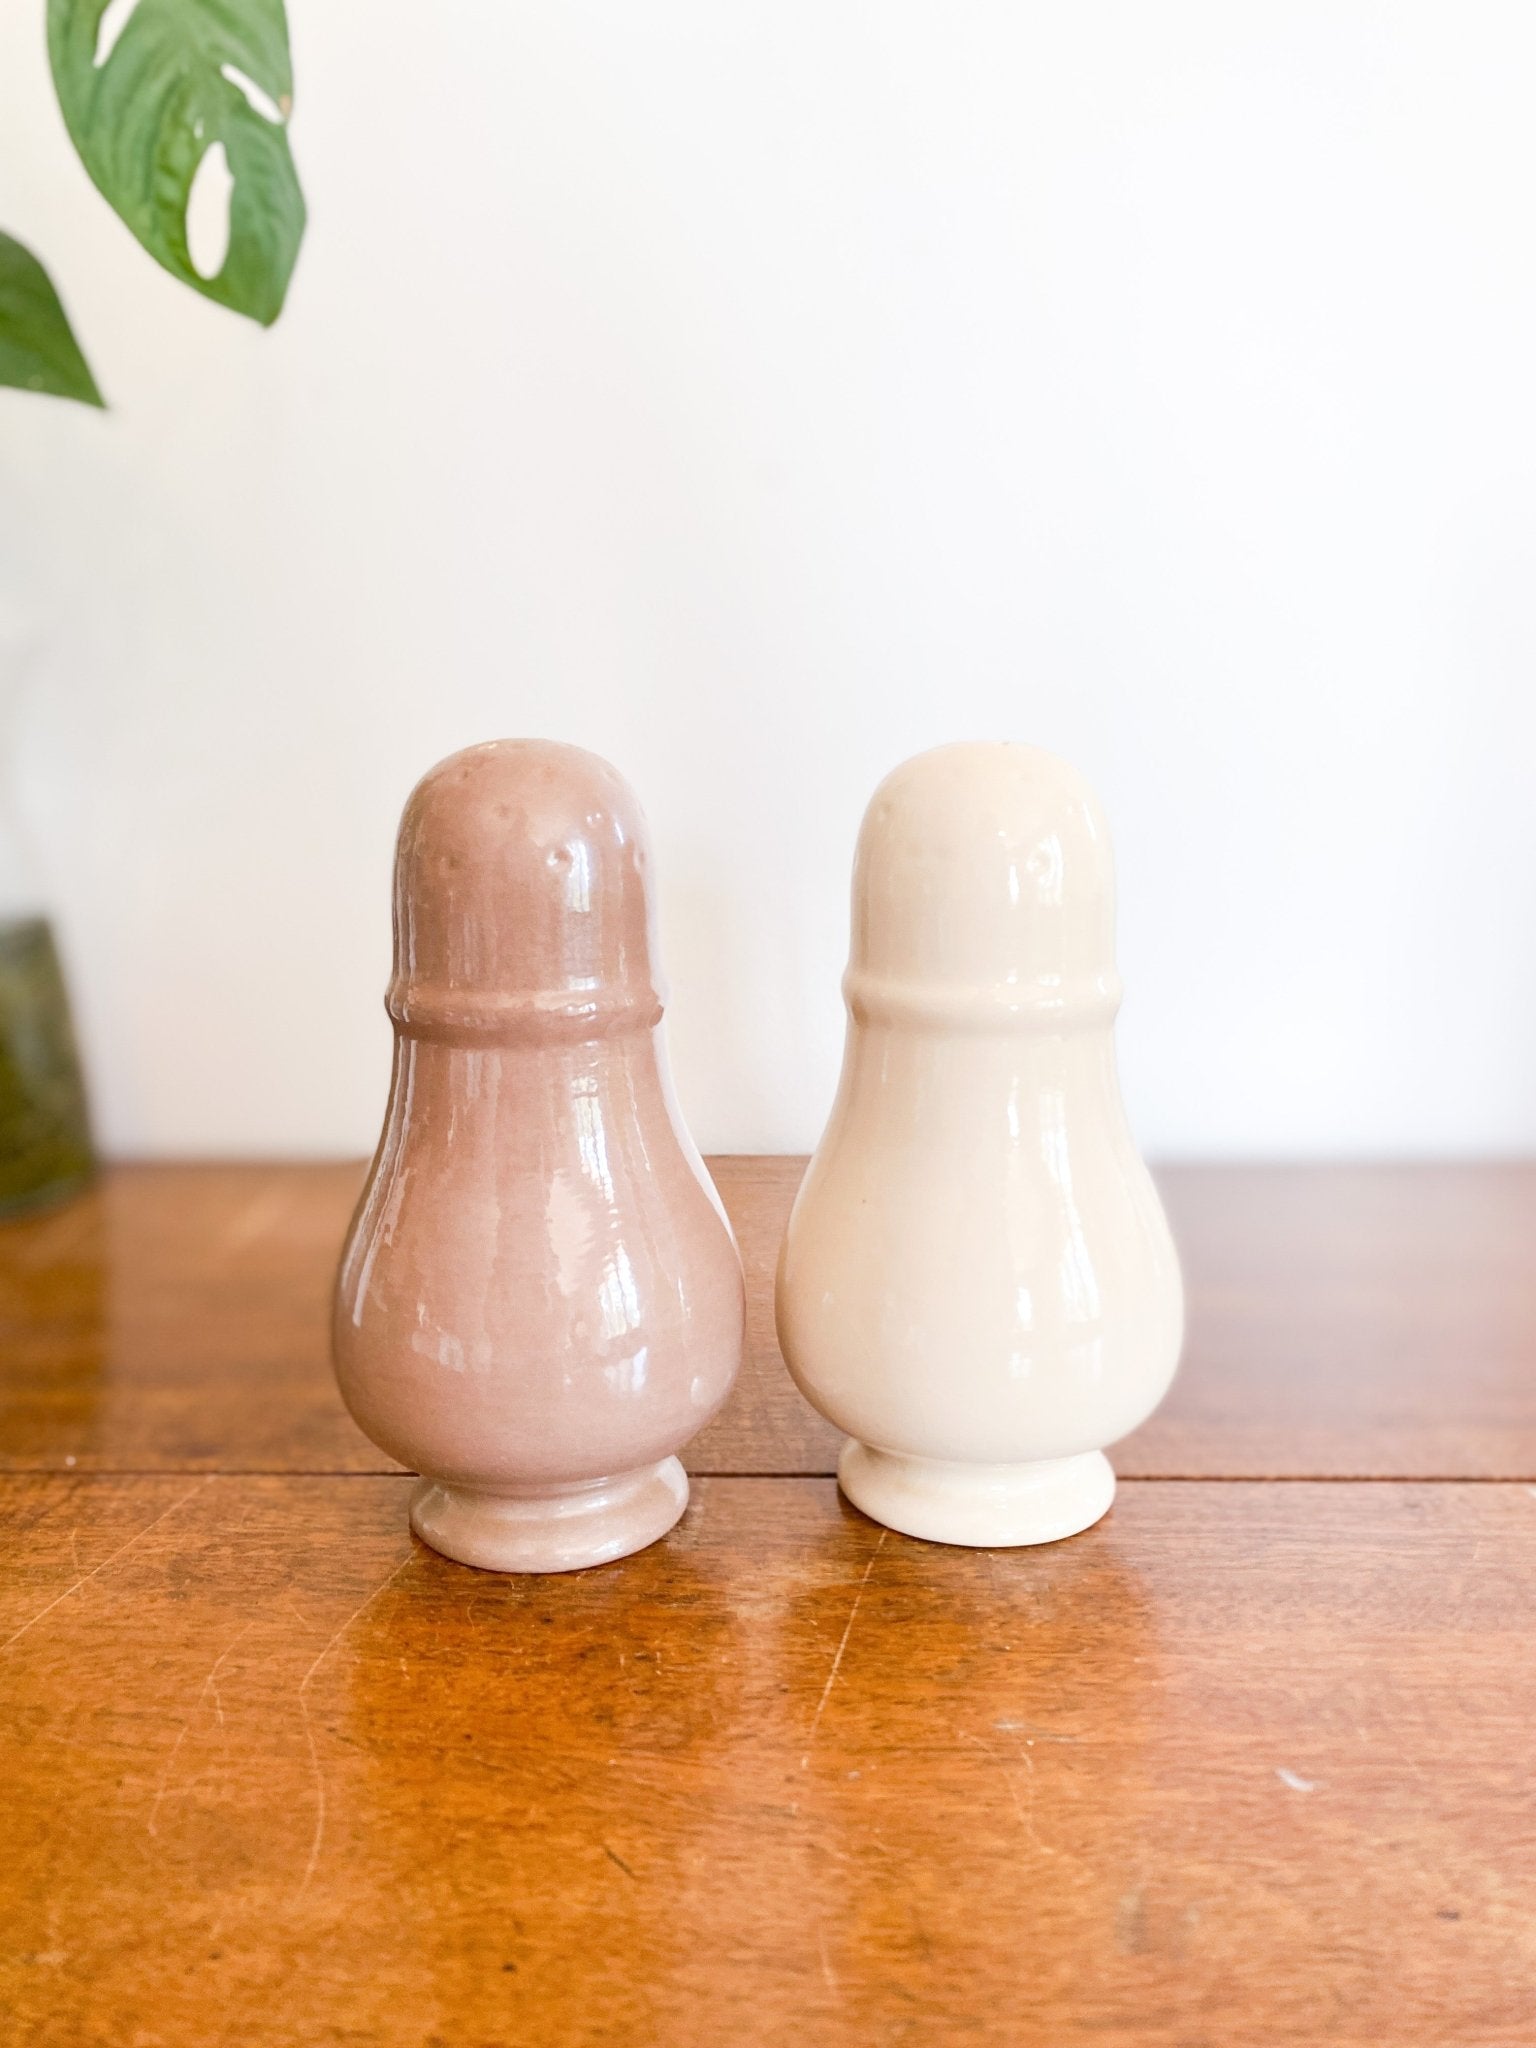 Muted Tones Salt and Pepper Shaker - Perth Market